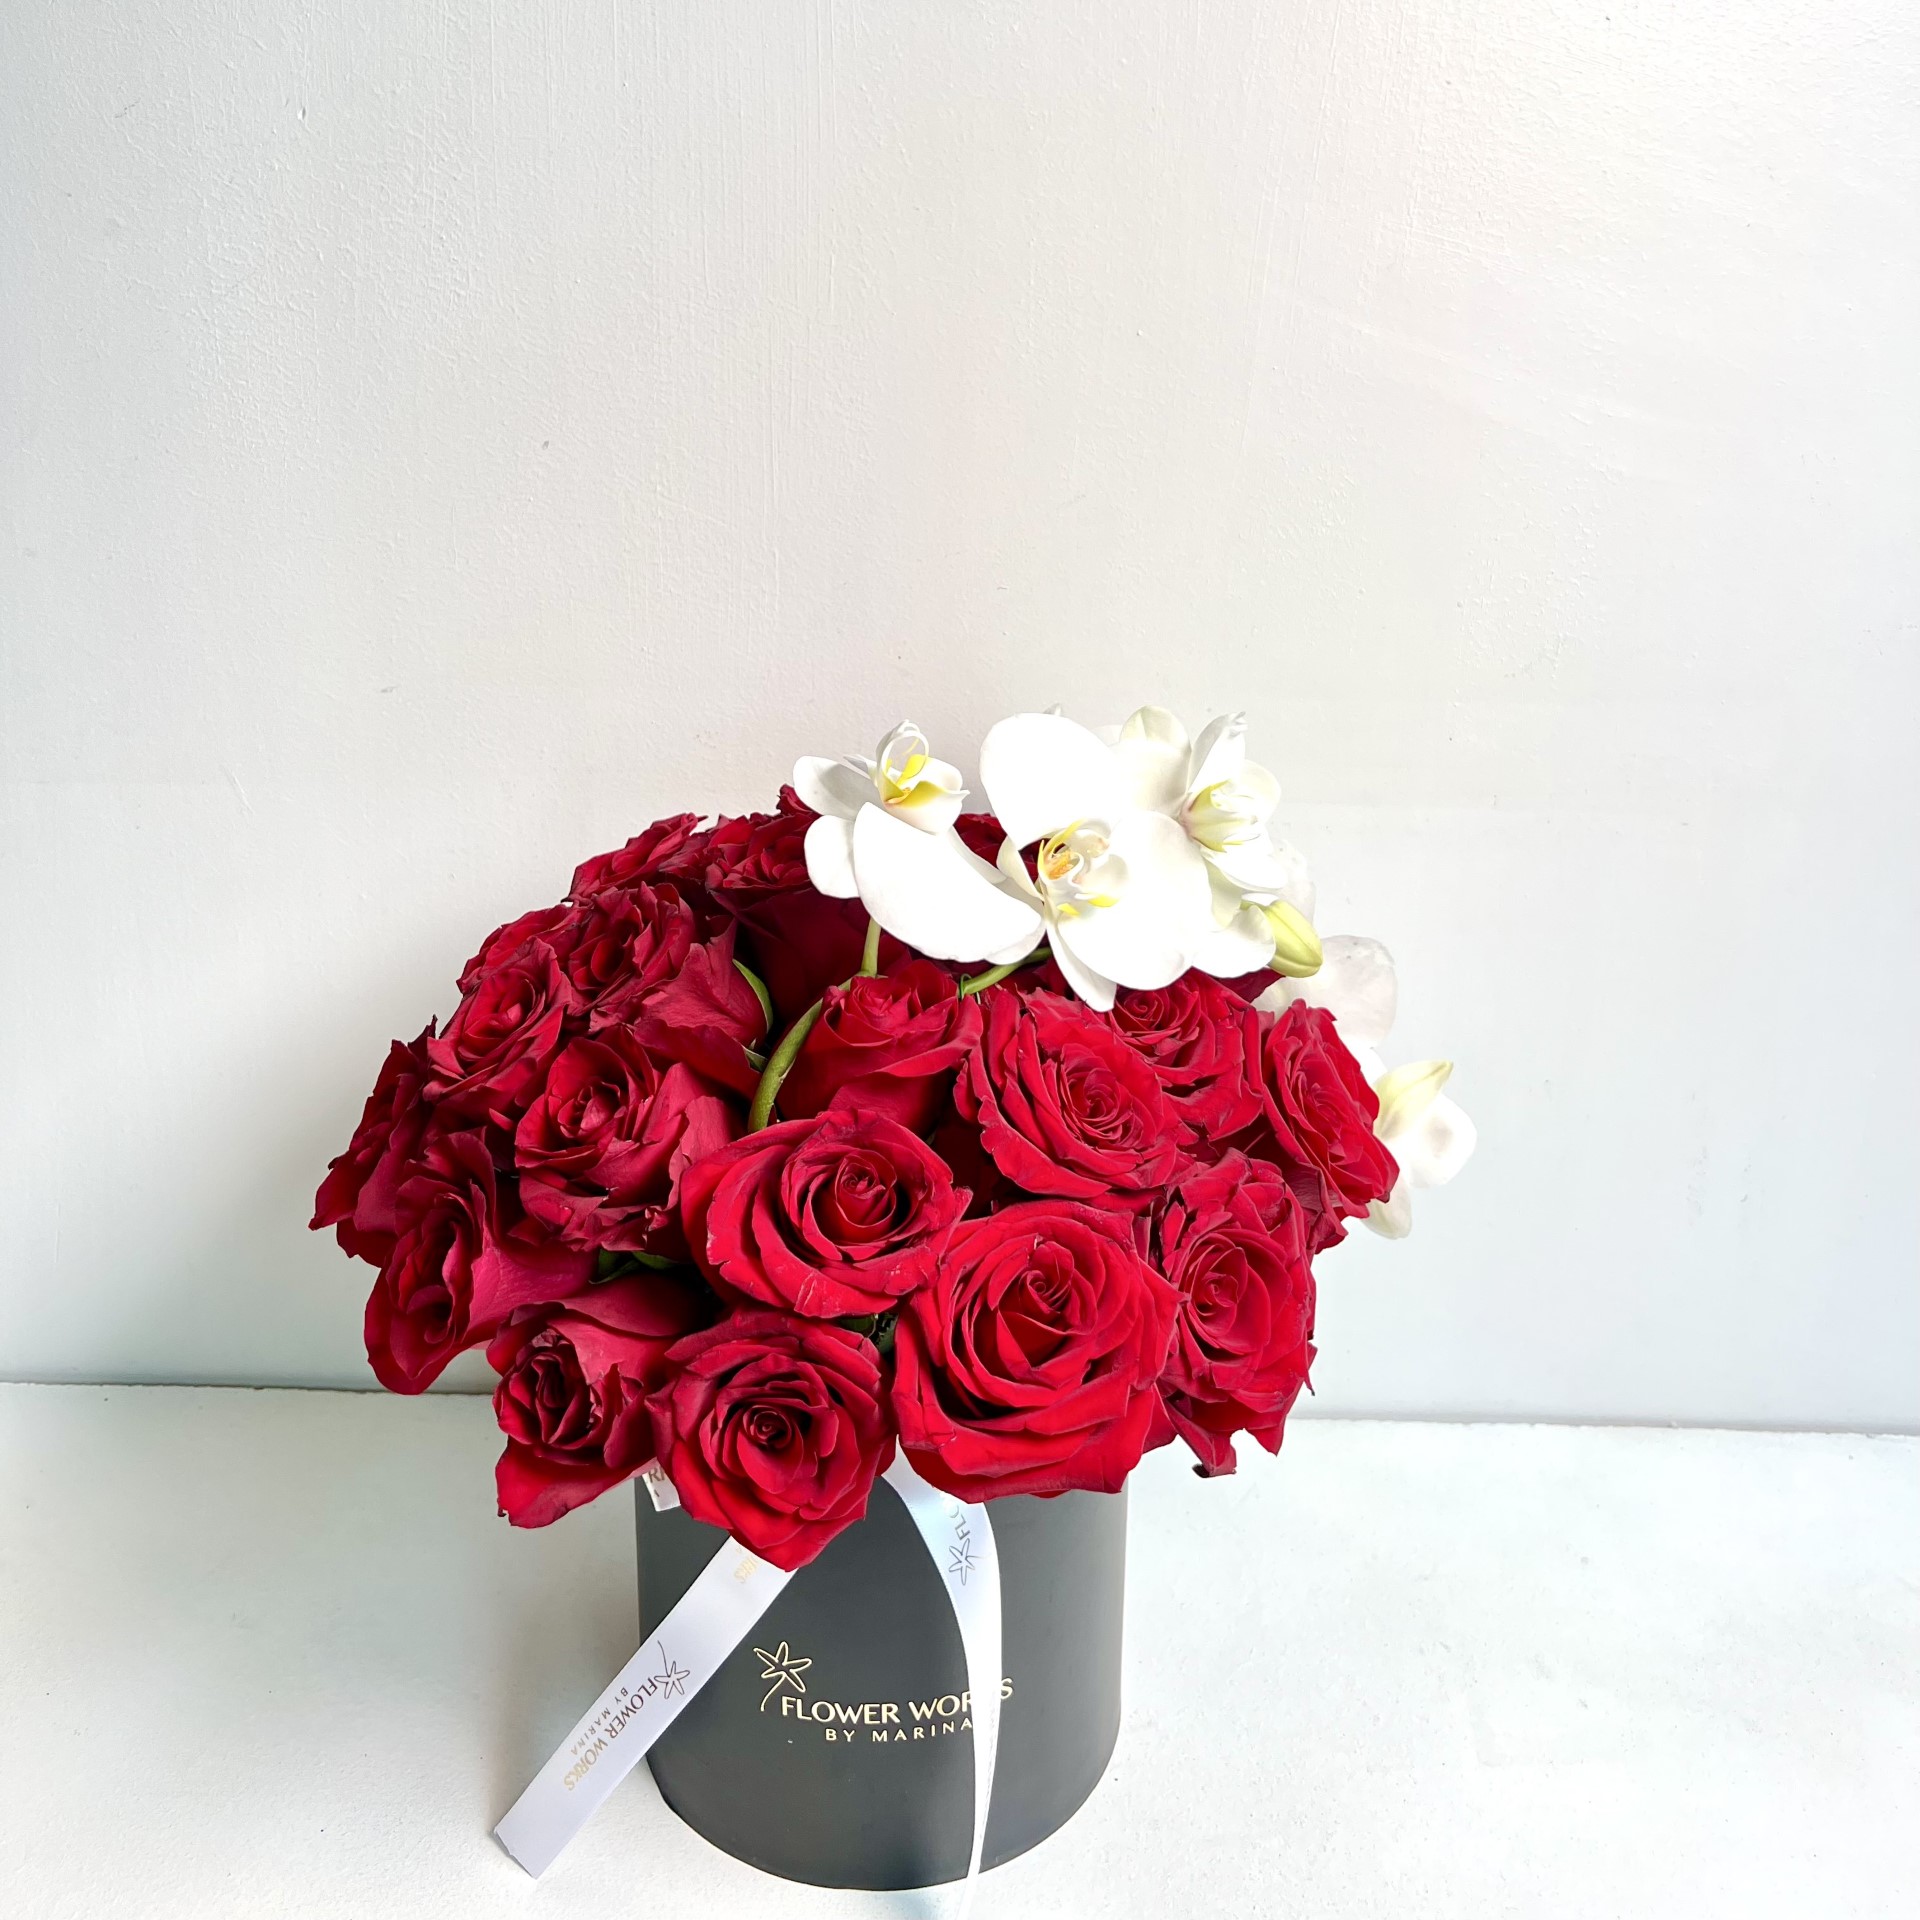 RED ROSES AND WHITE PHALEONOPSIS IN A BLACK BOX